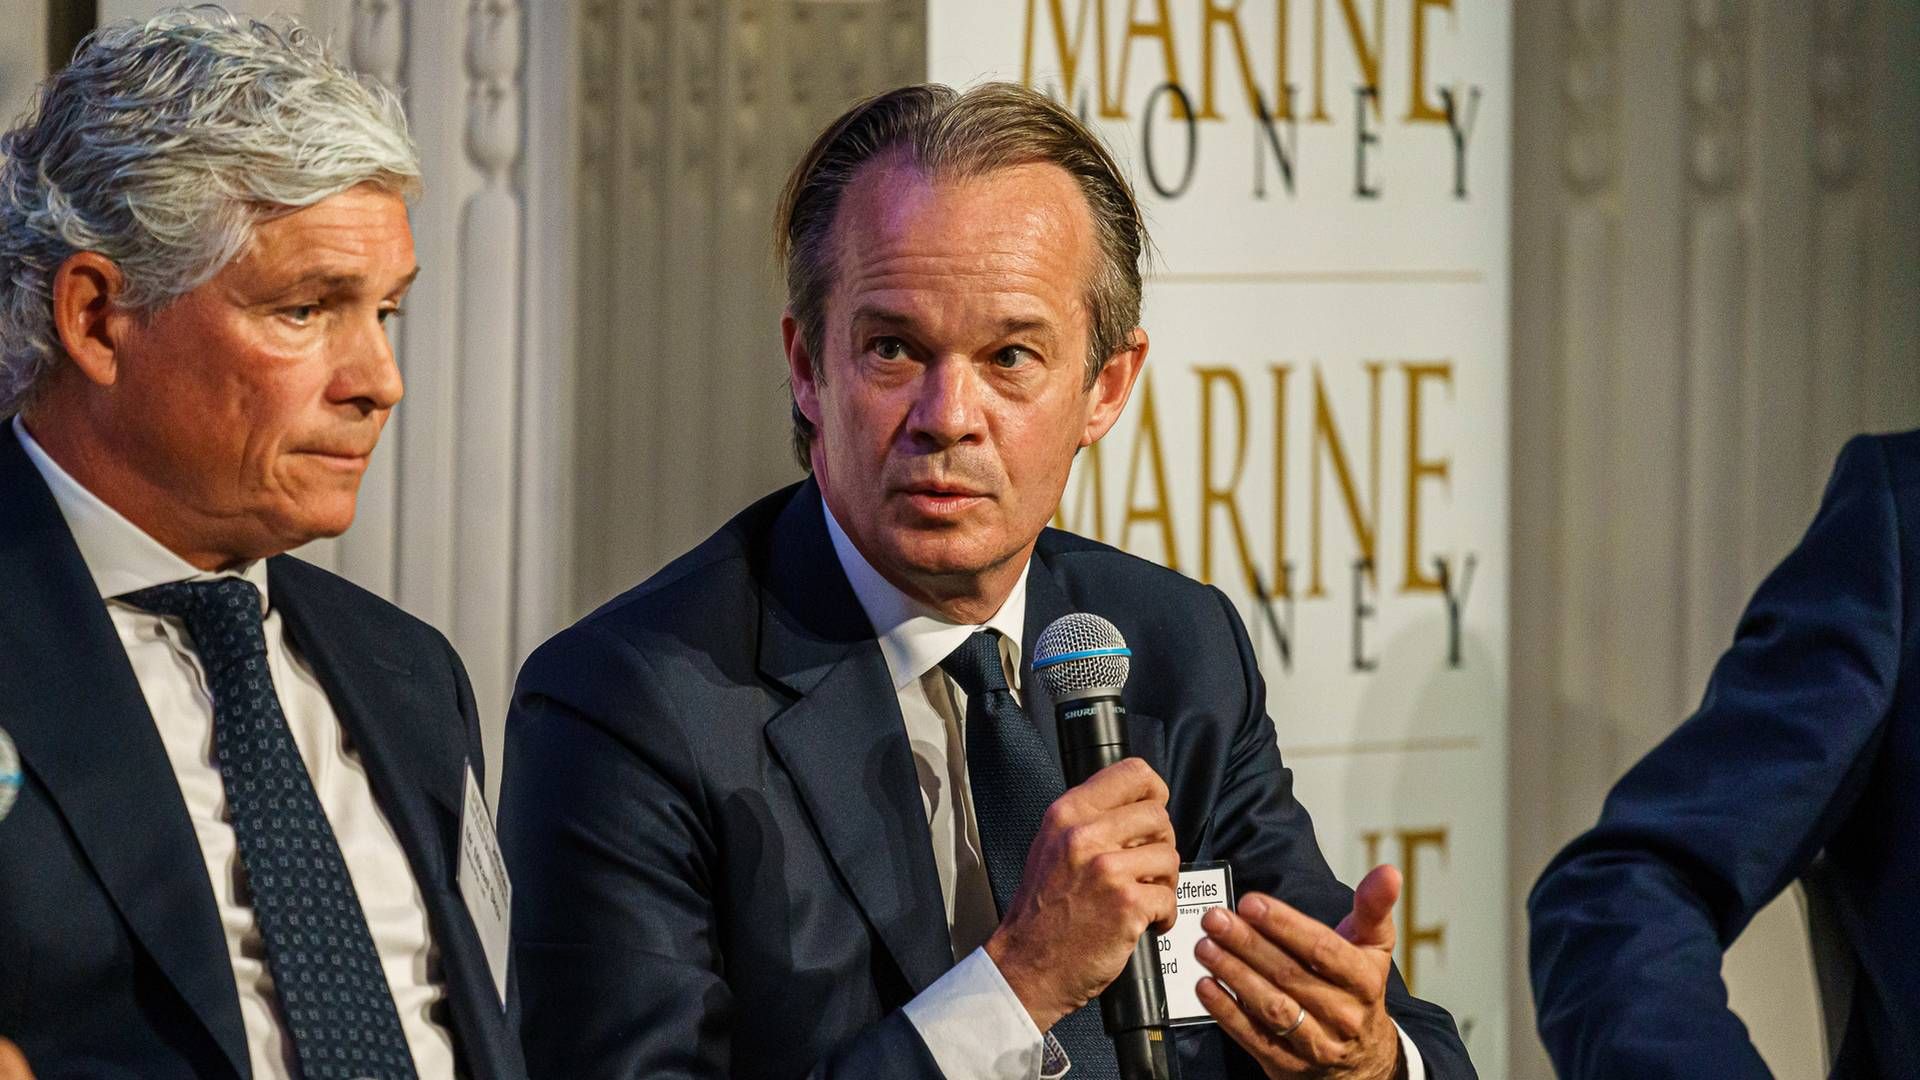 Hafnia CEO Mikael Skov (left) and Torm CEO Jacob Meldgaard (right) at the Marine Money conference in New York. | Photo: David Butler